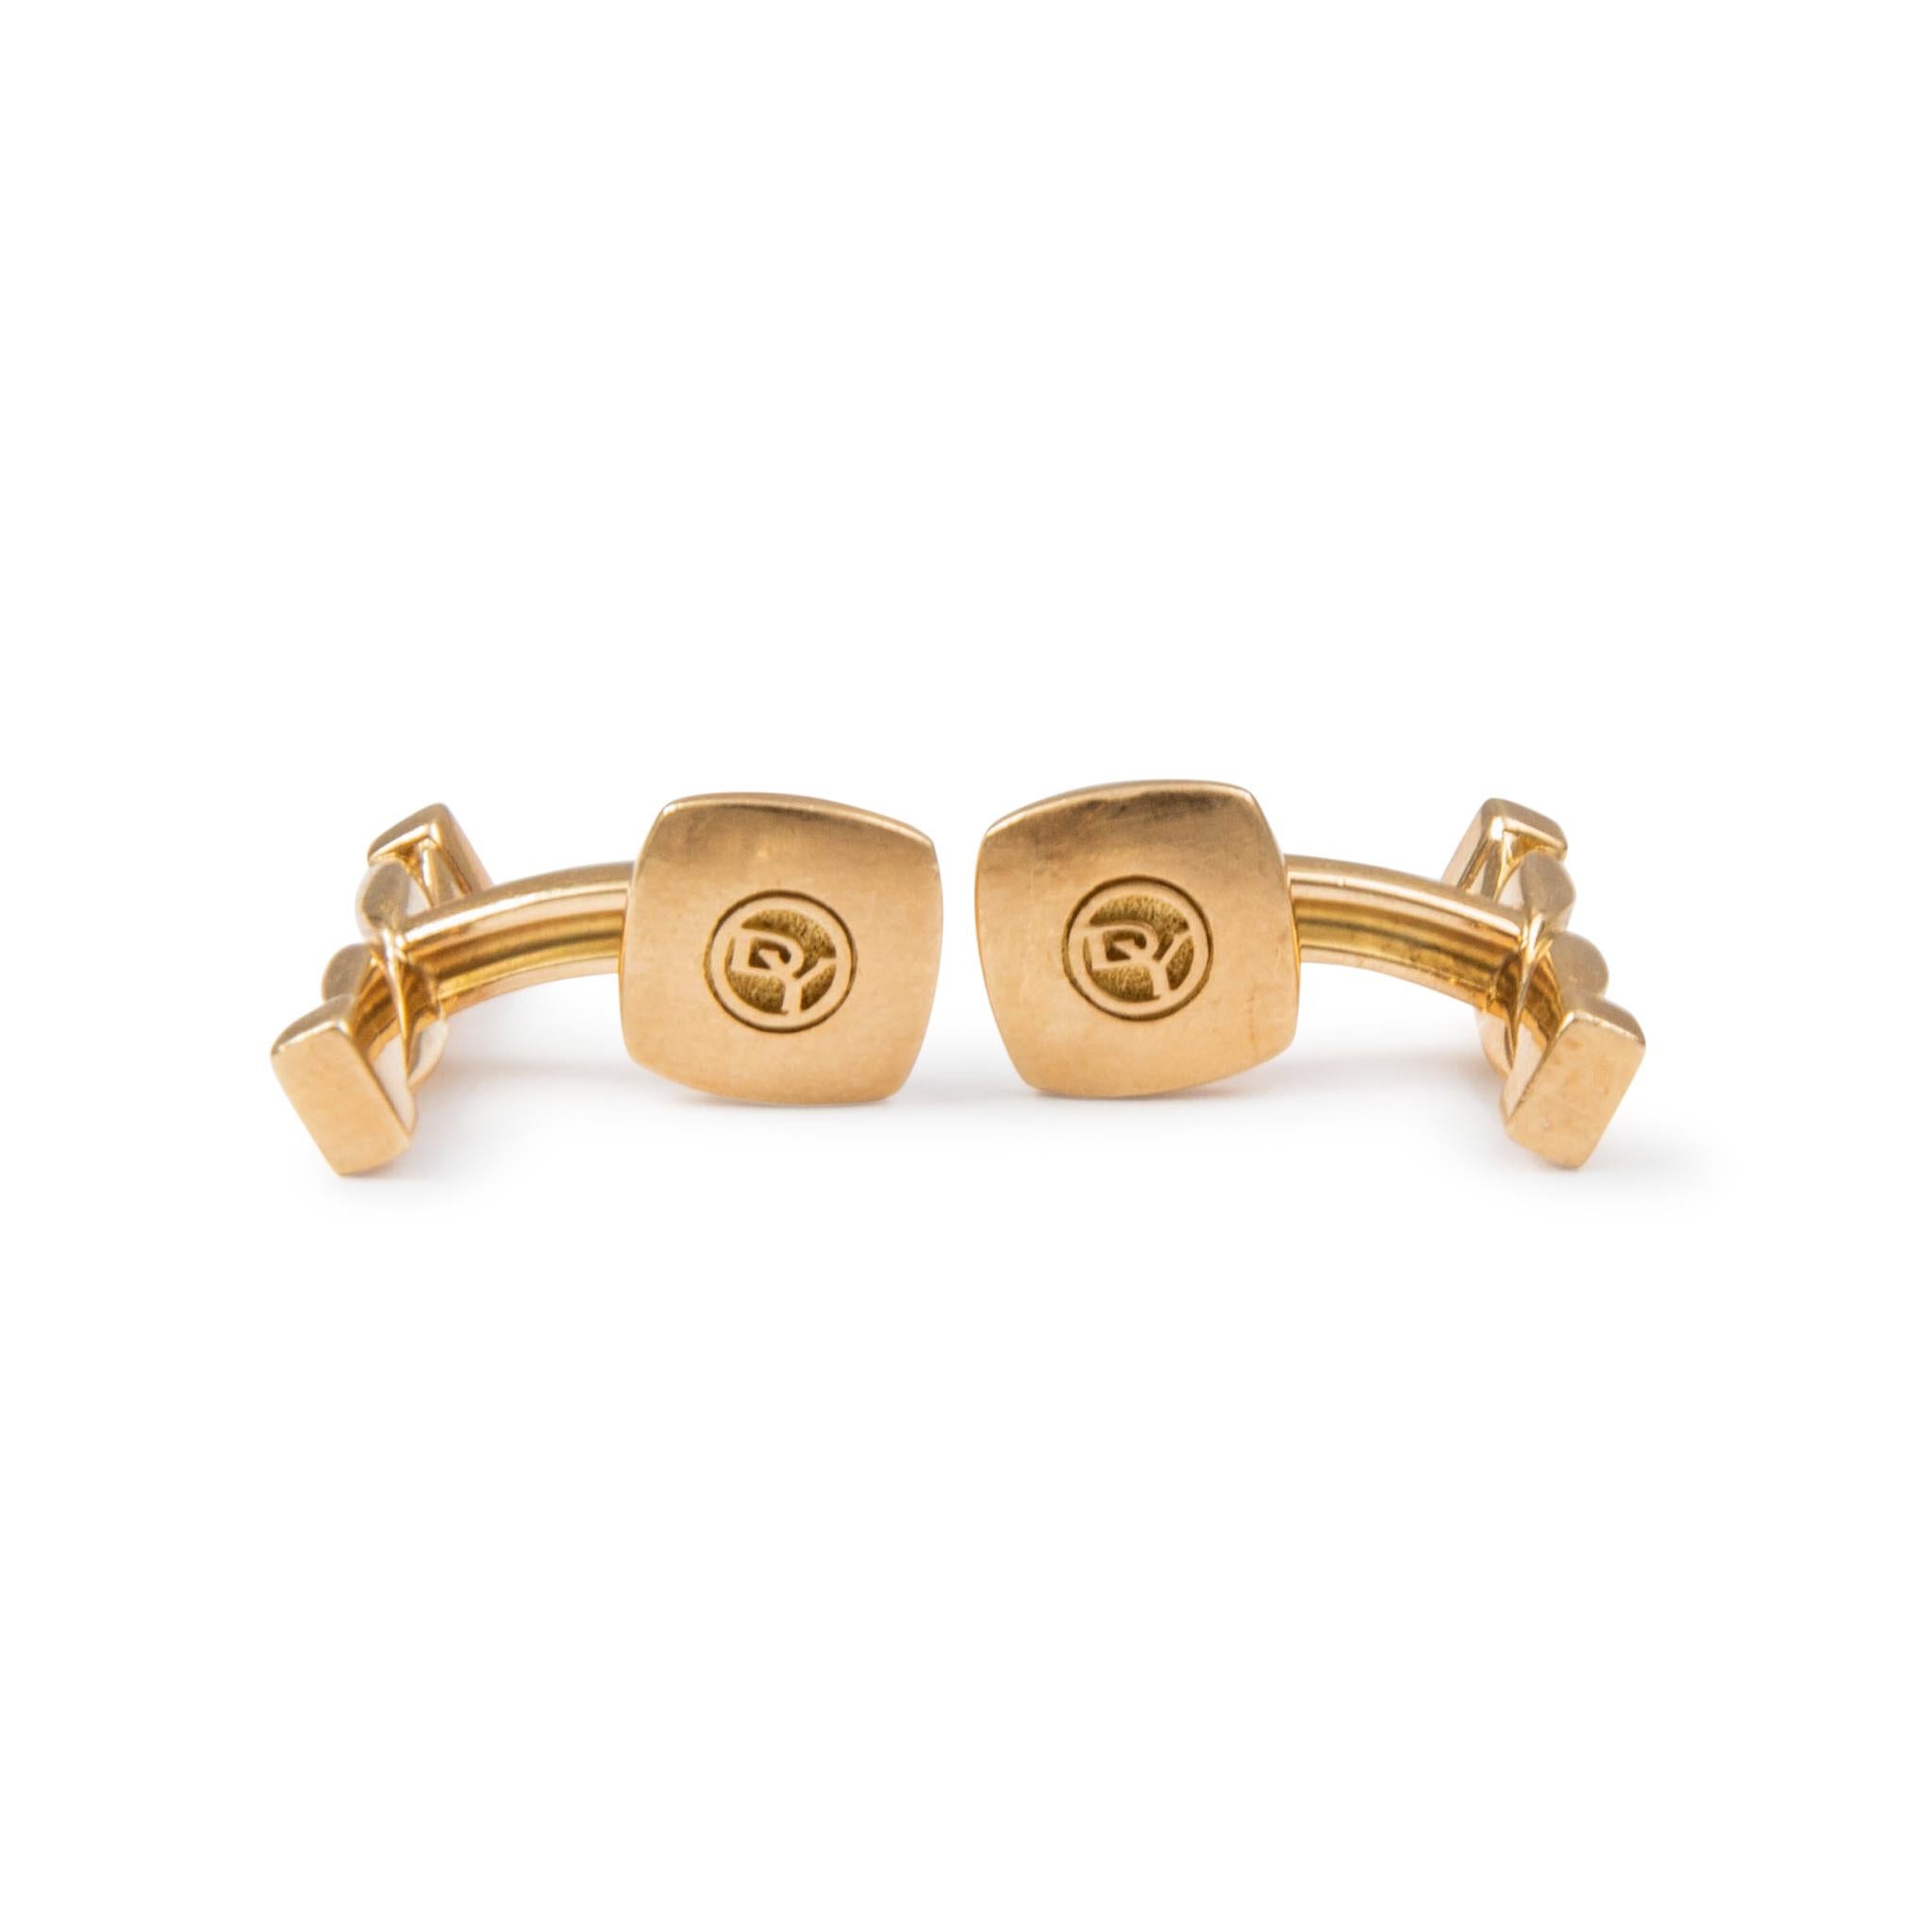 Gender: Ladies

Metal Type: 18K Rose Gold

Length: 1 Inch

Shank Width: 2.85mm tapering to 11.64mm 

Weight: 19.16 Grams


Mens 18K rose gold cufflinks.

Engraved with 